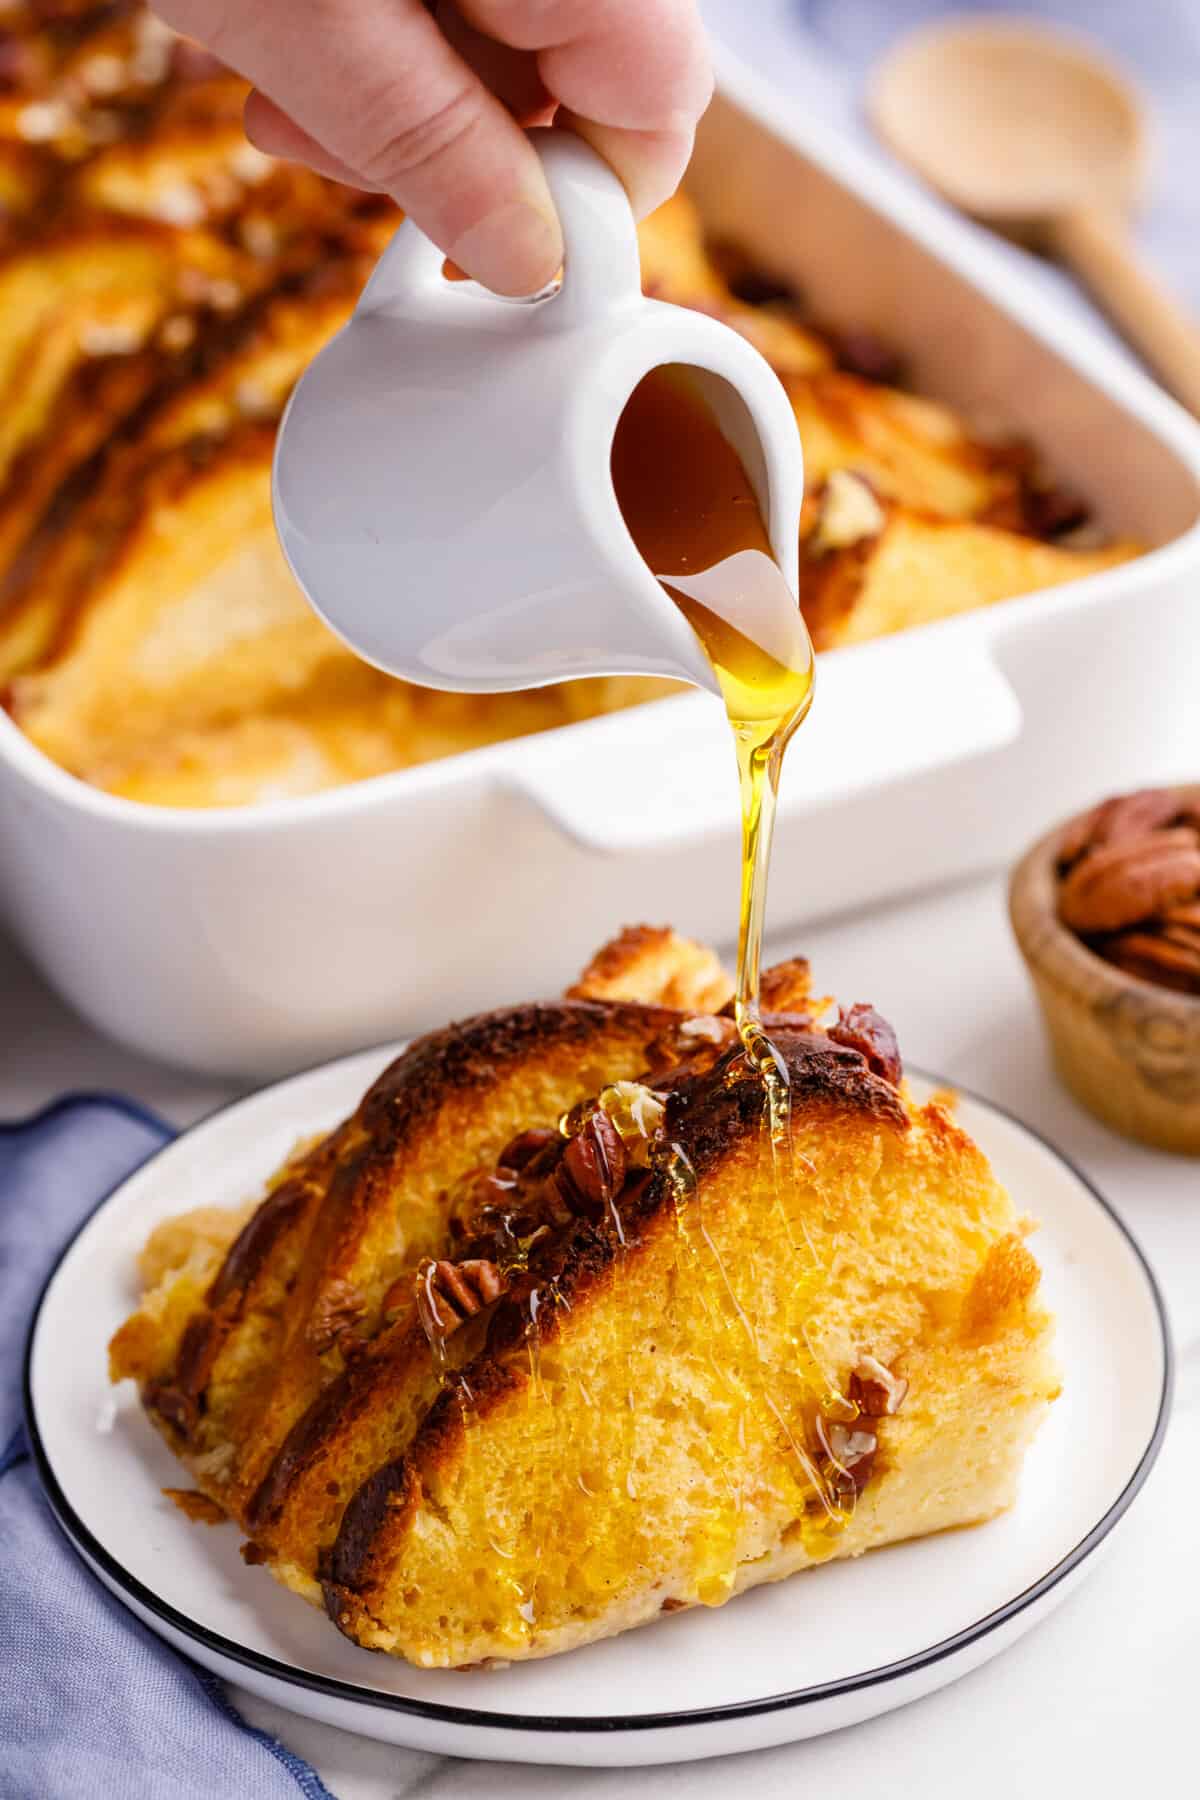 syrup pouring on top of a serving of french toast casserole sitting on a white round plate.